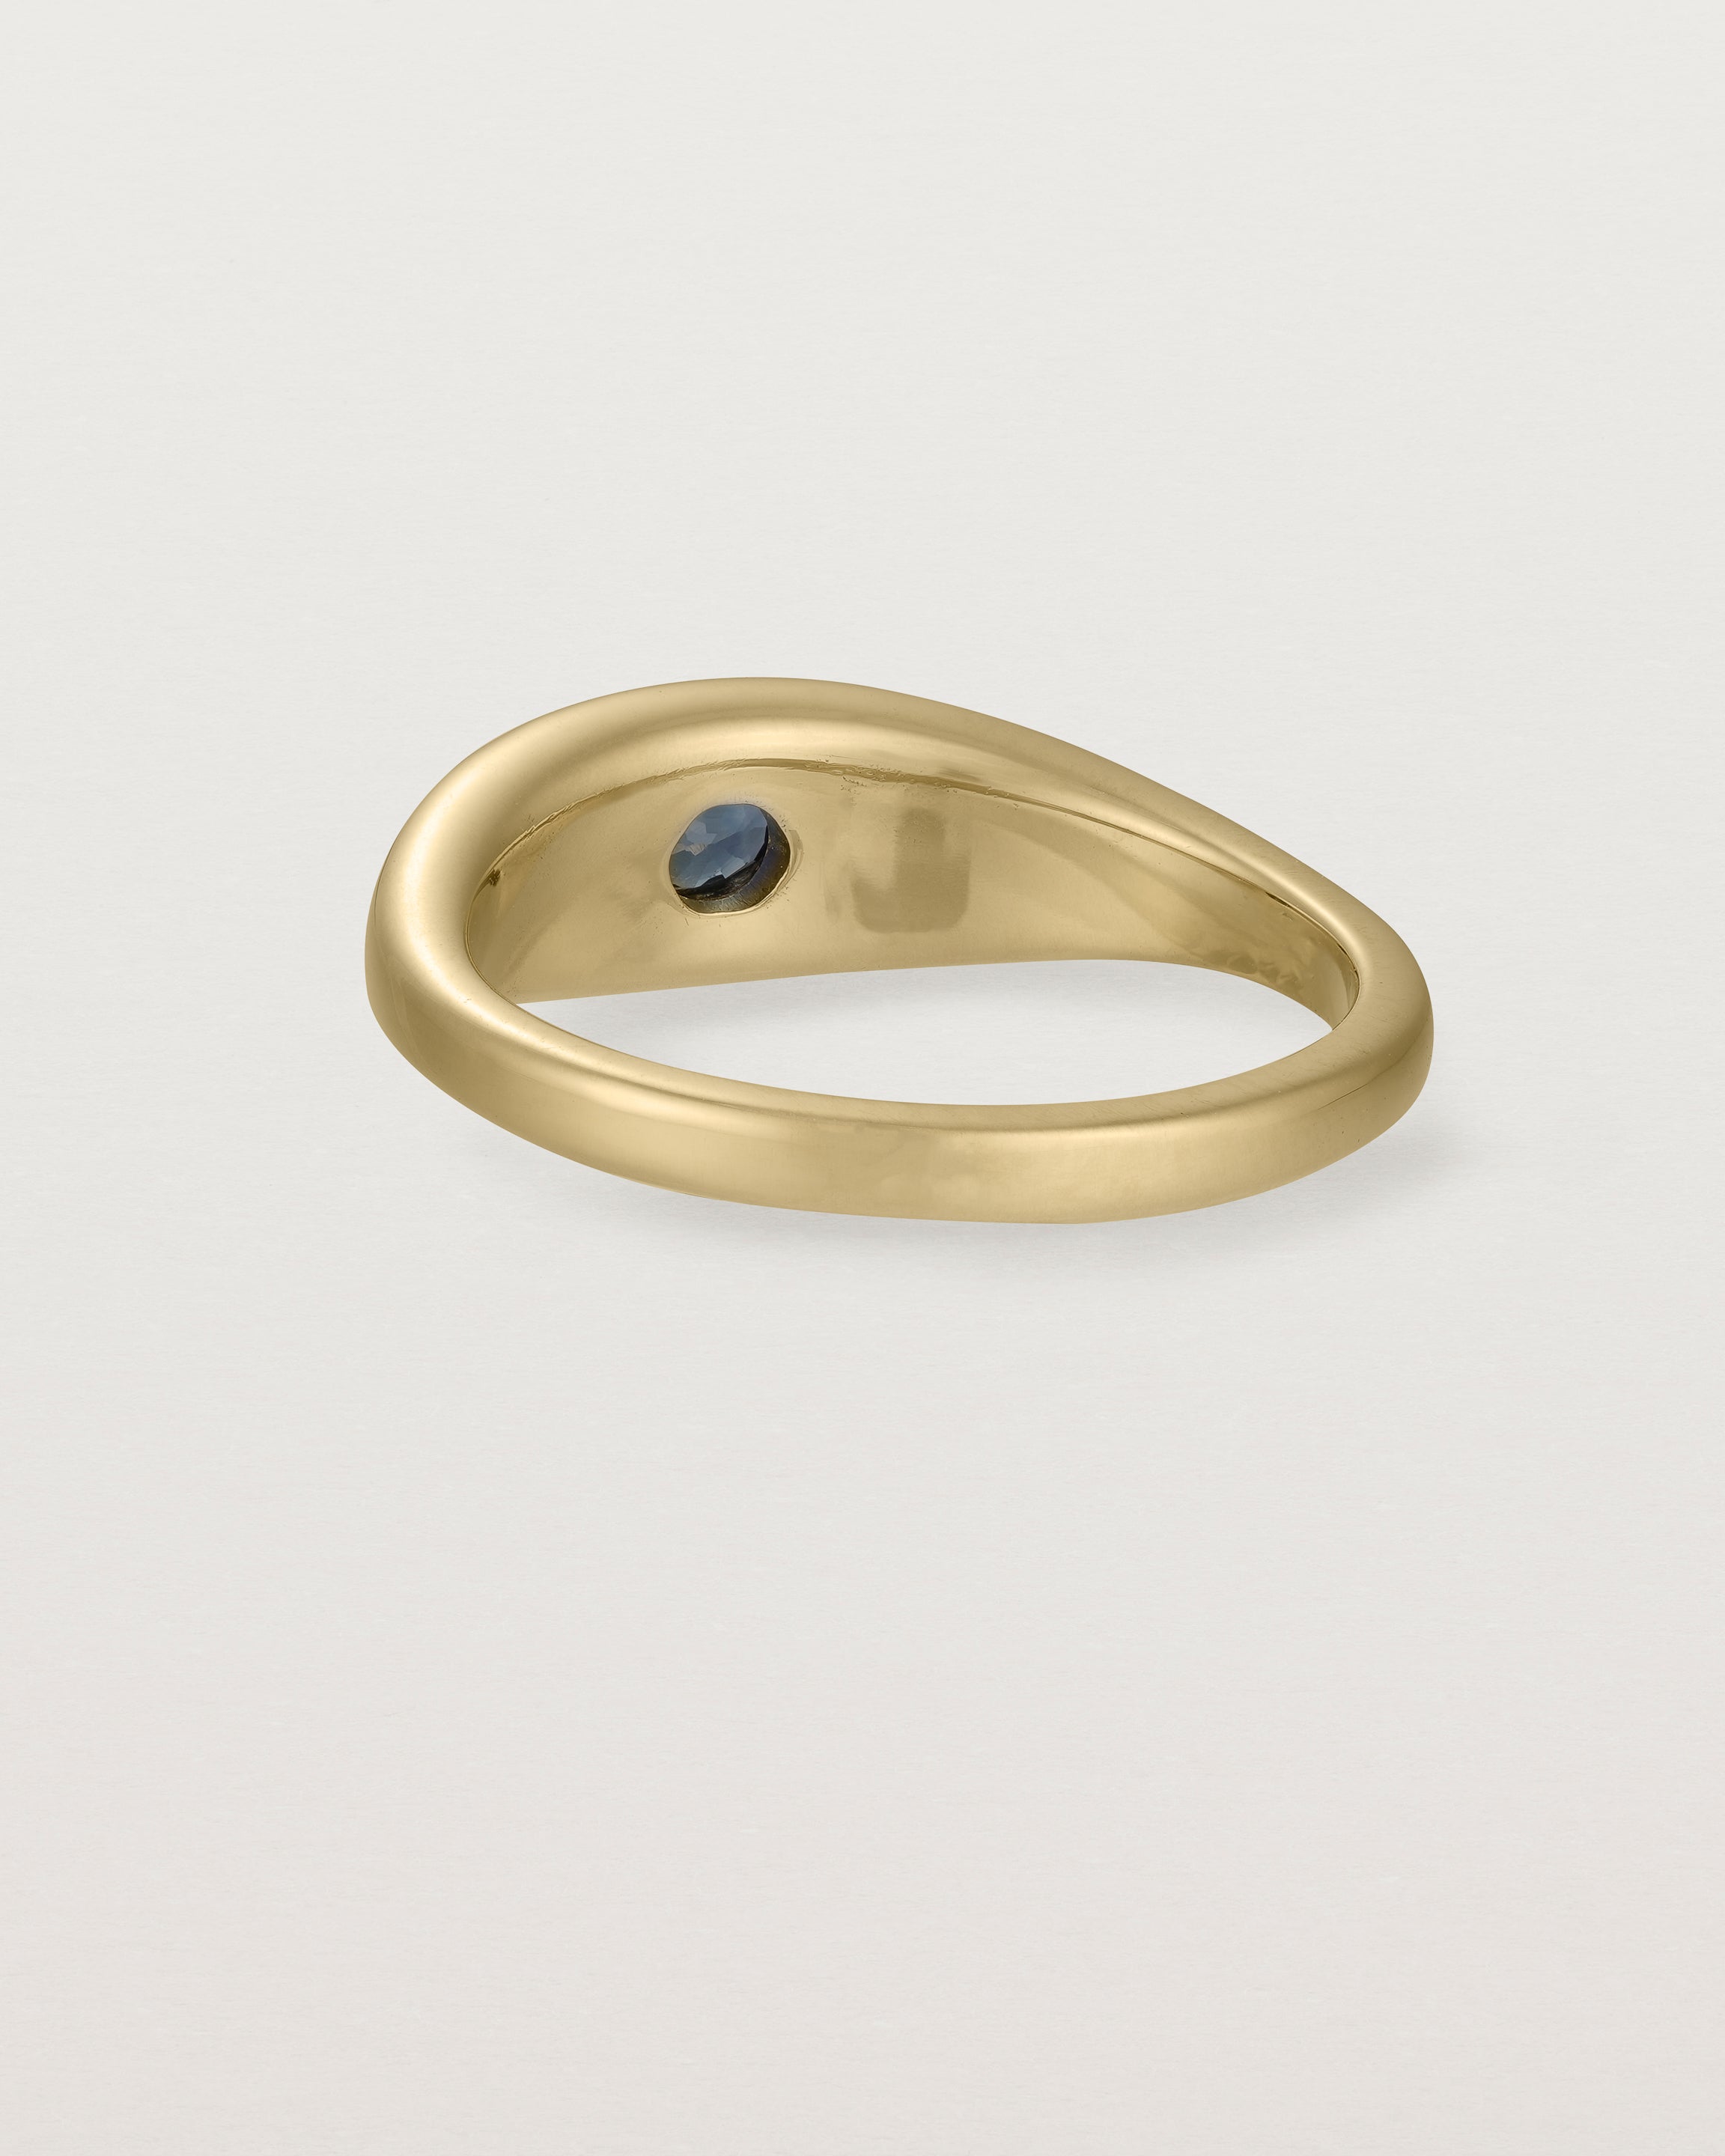 Back view of the Seule Single Ring | Australian Sapphire | Yellow Gold.